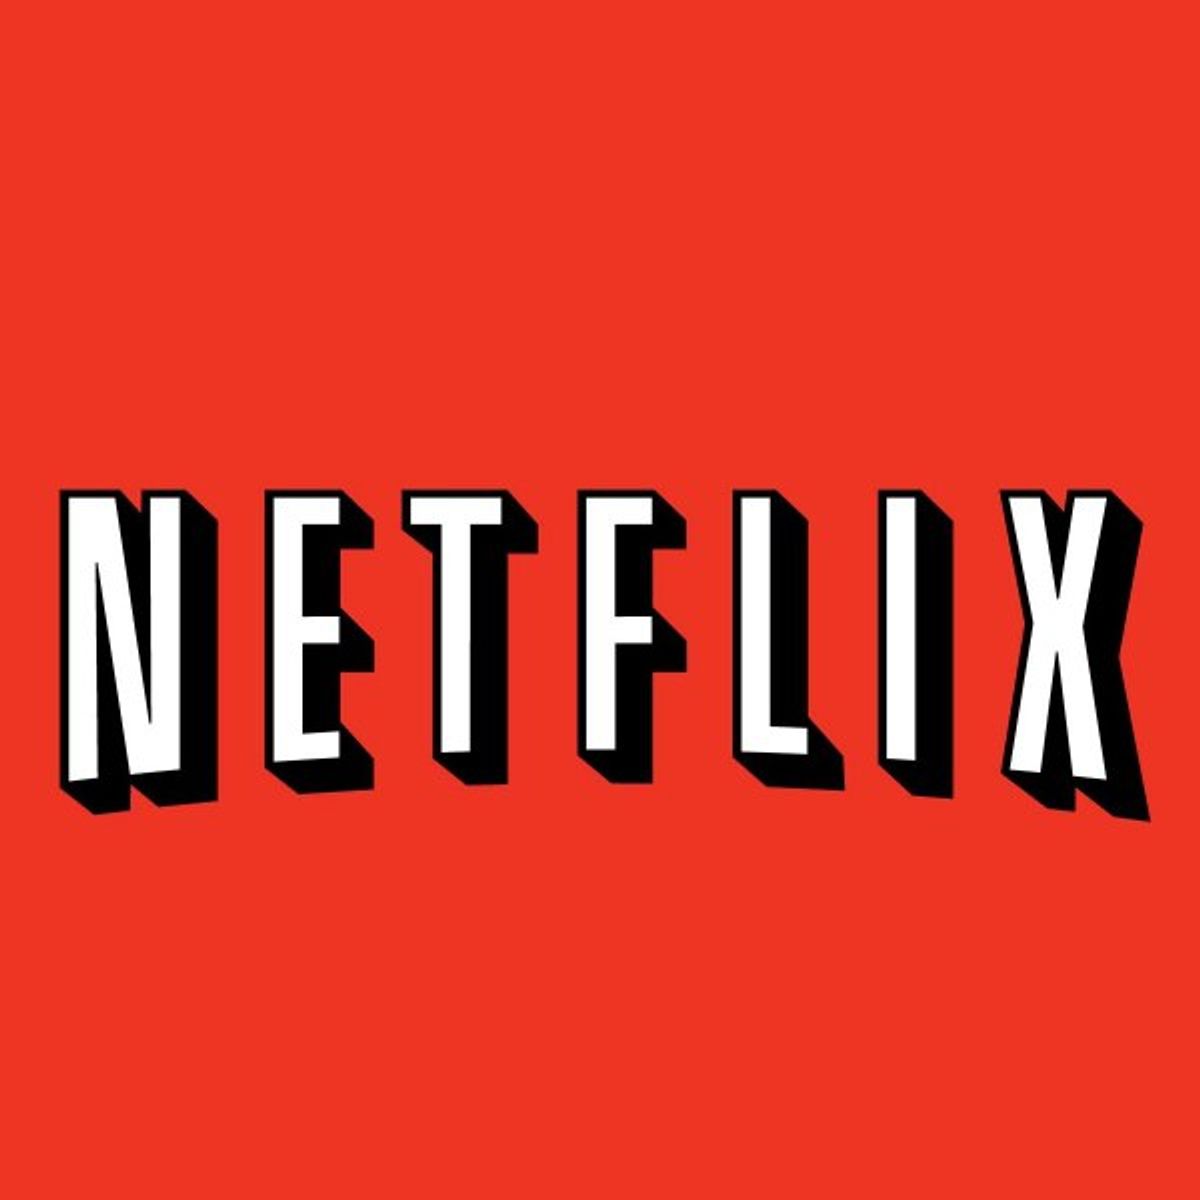 What Should I Watch On Netflix?